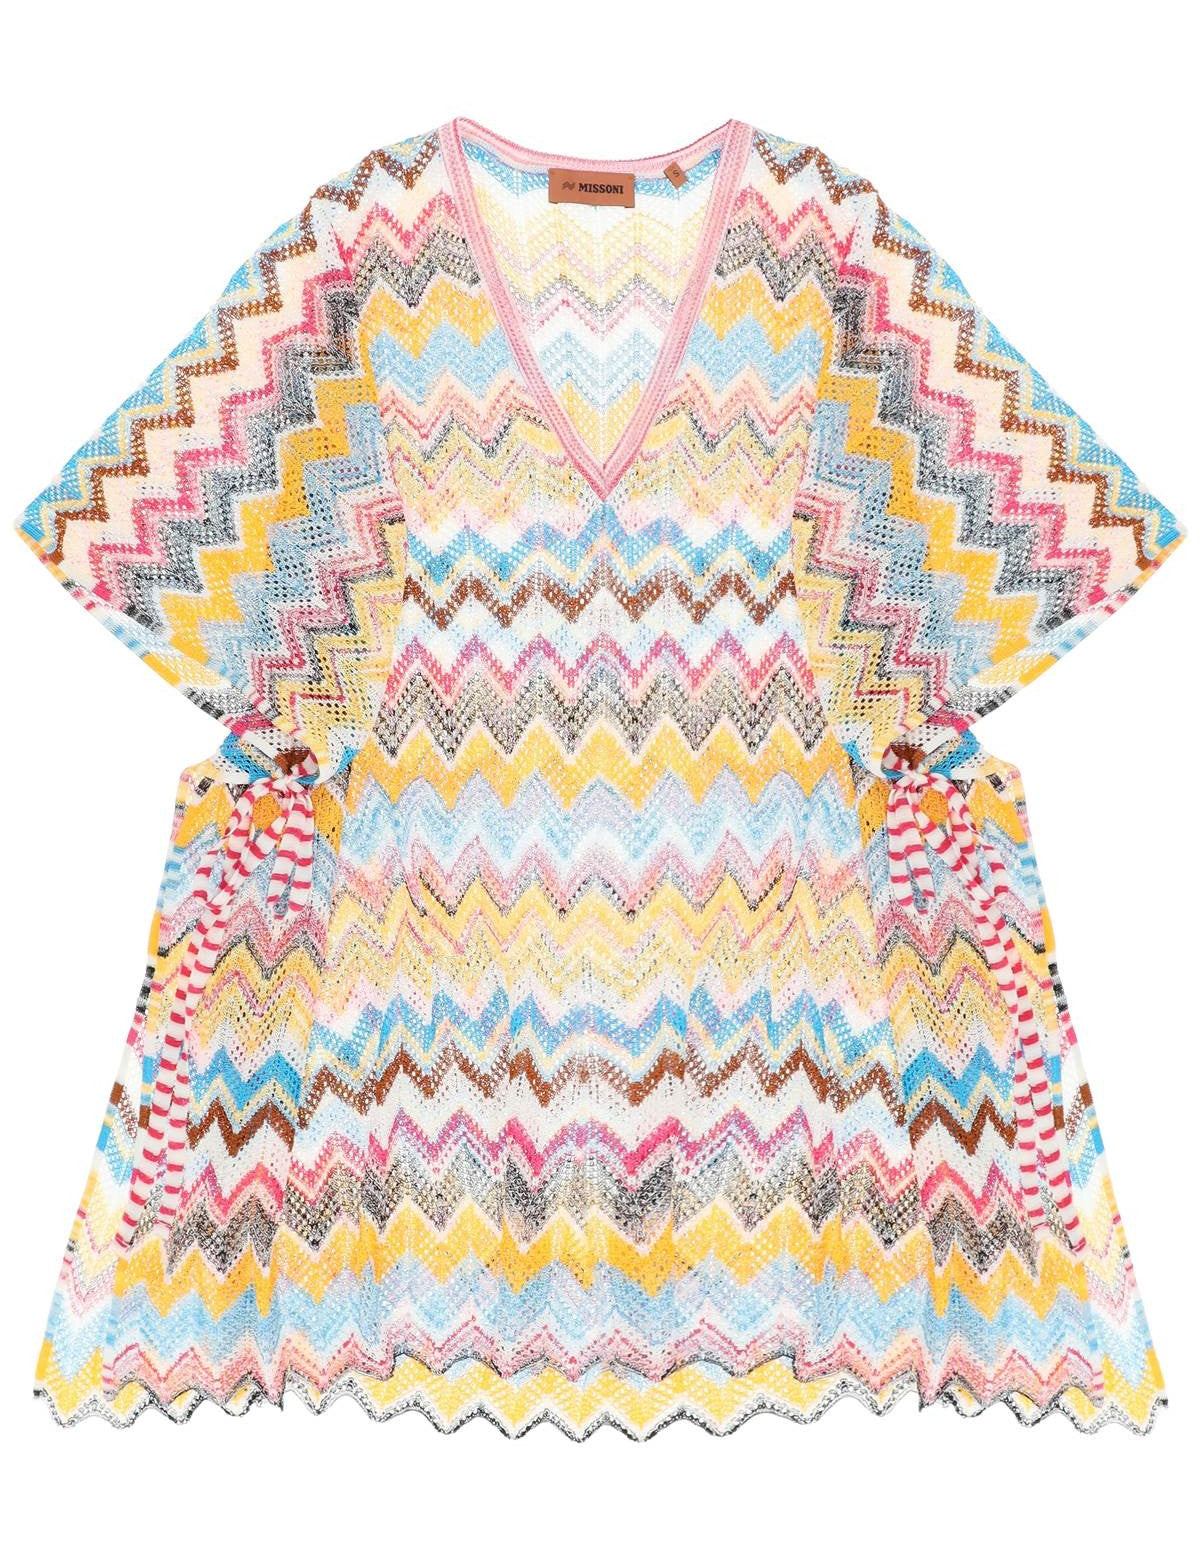 missoni-multicolor-knit-poncho-cover-up.jpg